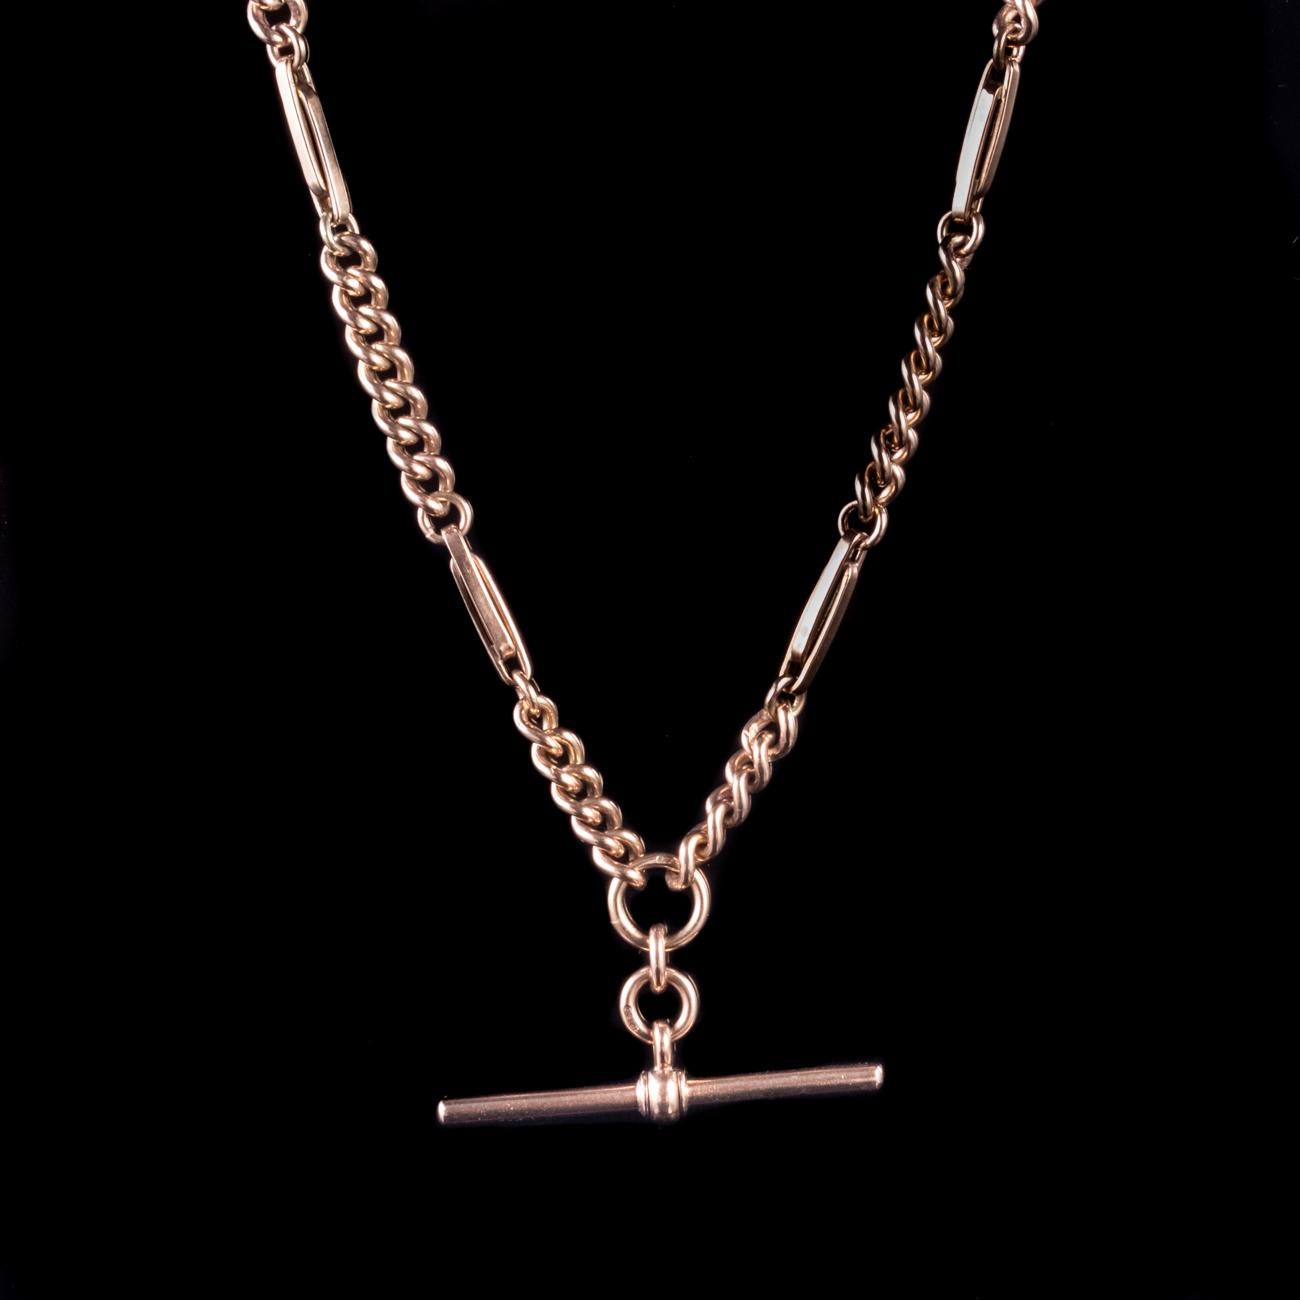 This beautiful Antique Victorian Albert chain has been crafted in 9ct Rose Gold and features a decorative T bar.

The chain features smaller sections of chain links, which are broken up by larger stylish double link sections.

A gorgeous necklace